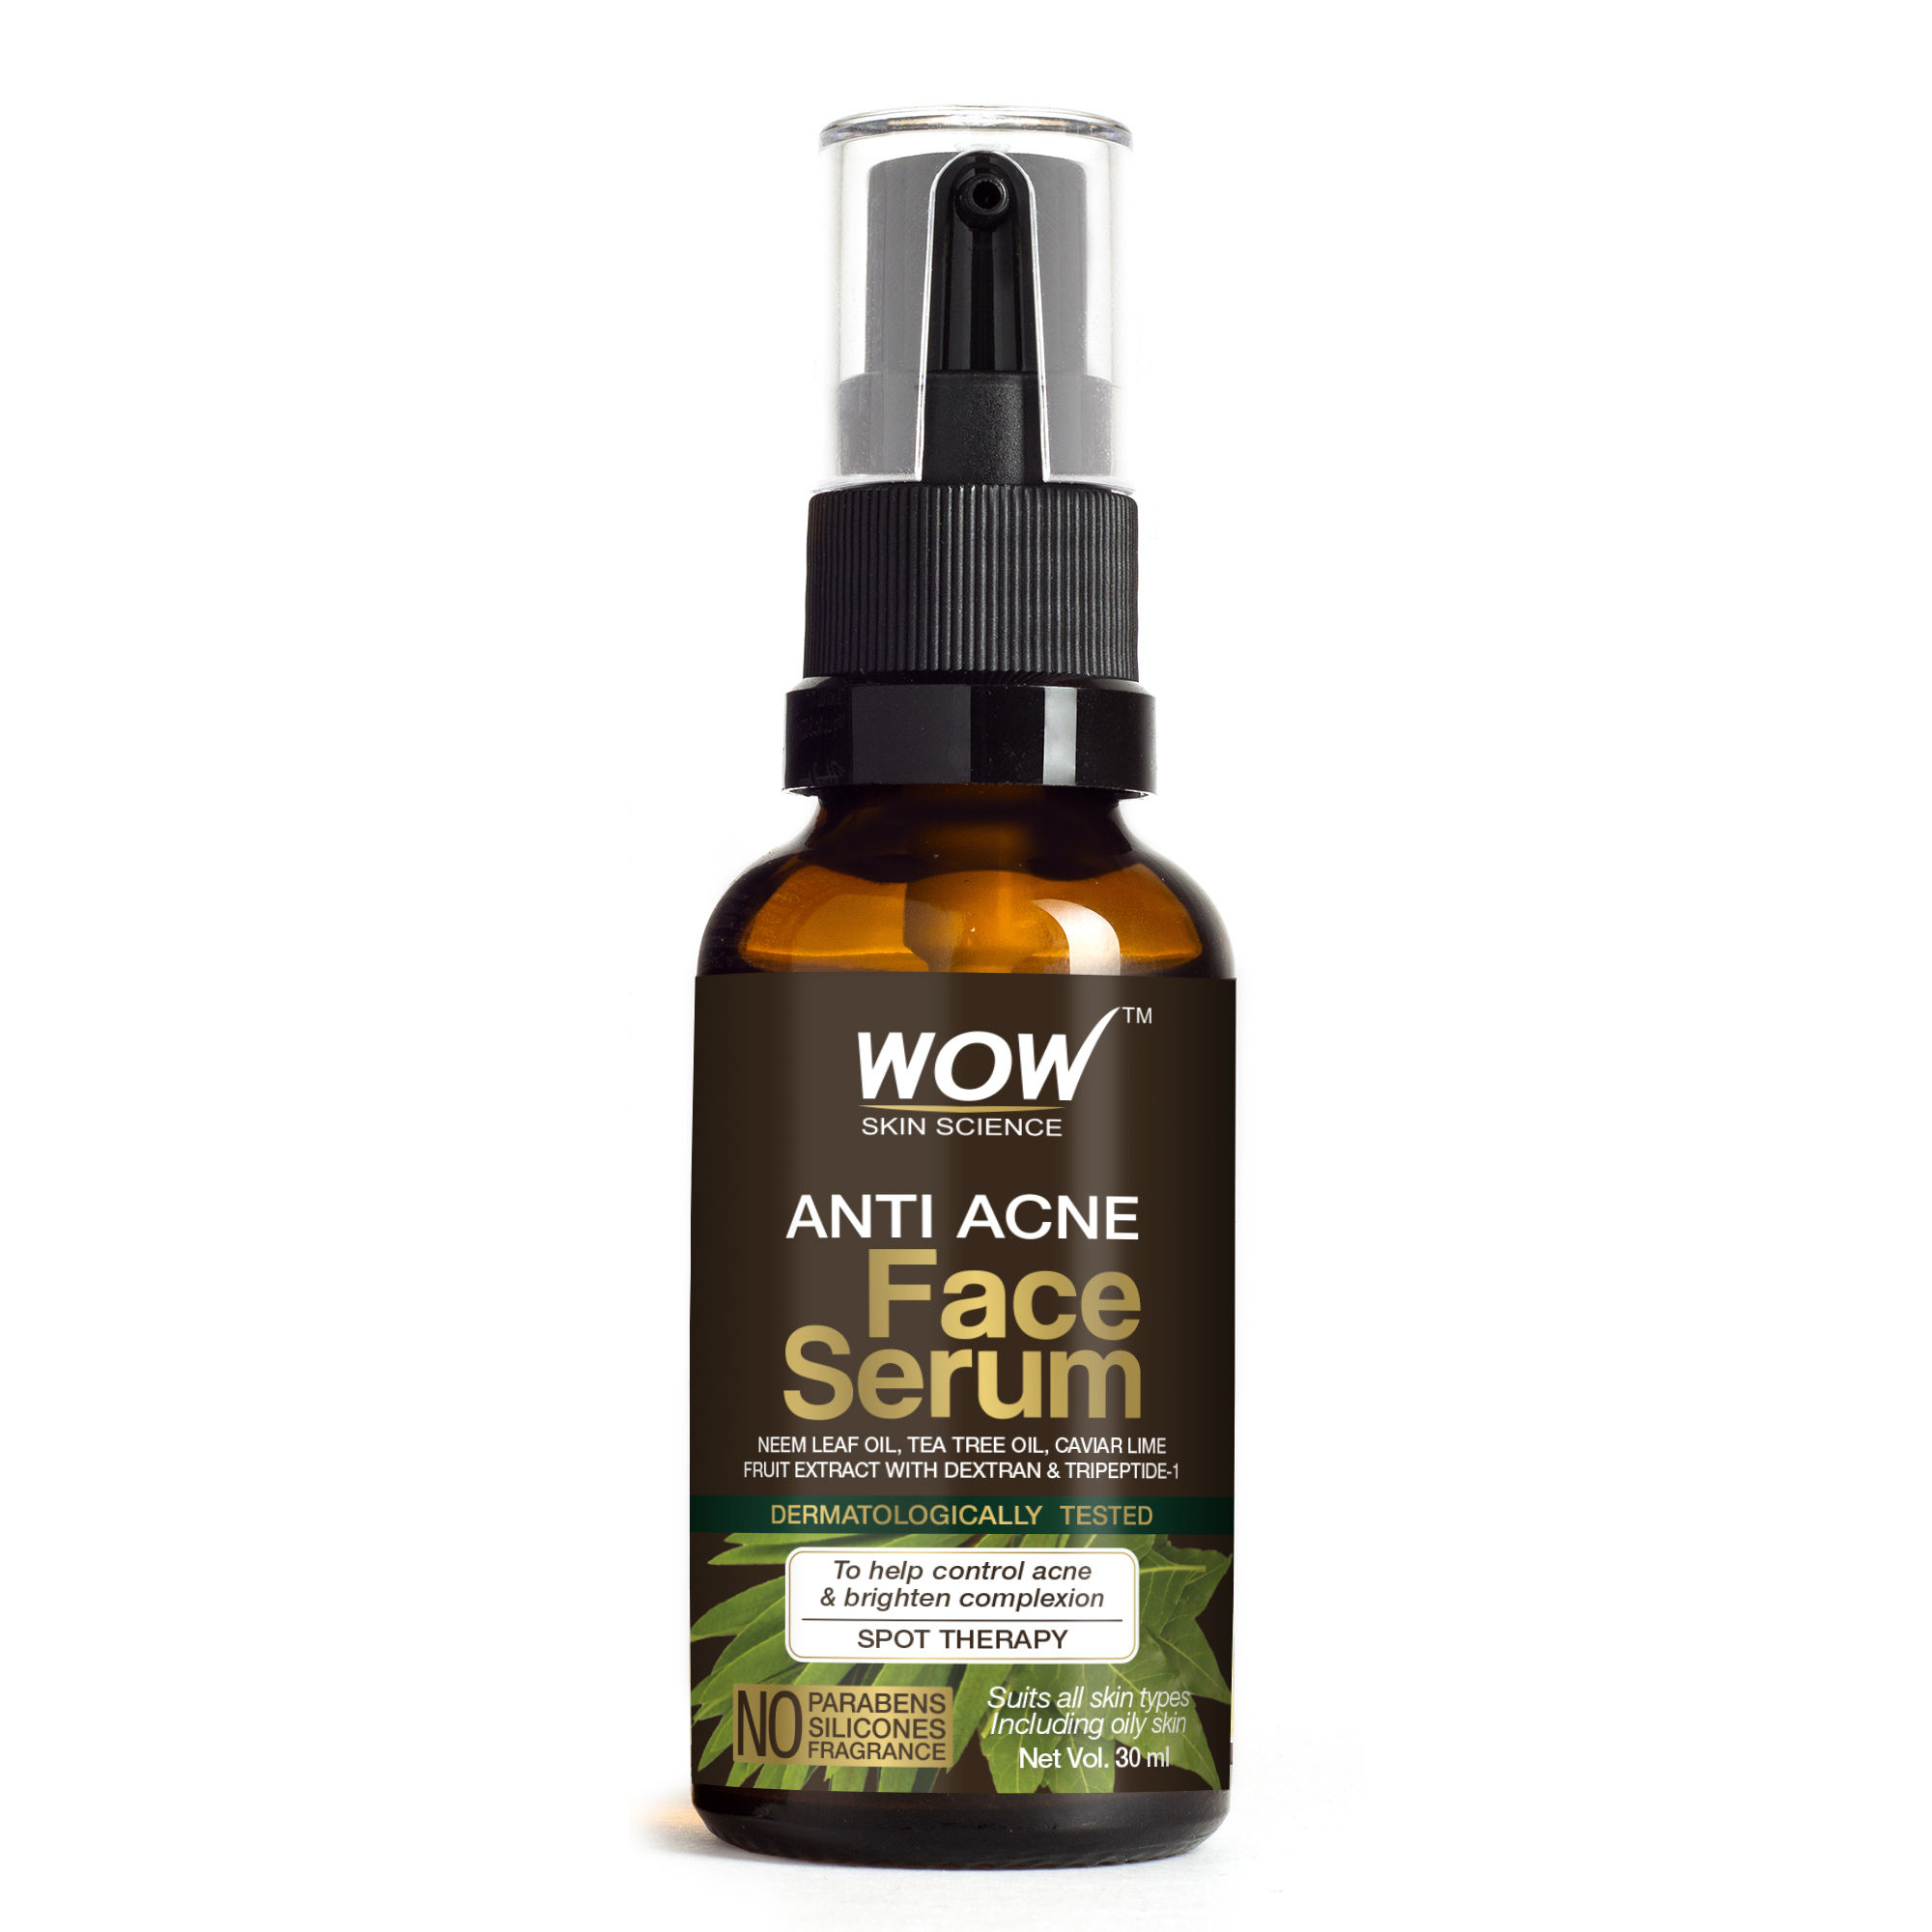 Wow Skin Science Anti Acne Face Serum 30ml Buy Wow Skin Science Anti Acne Face Serum 30ml Online At Best Price In India Nykaa